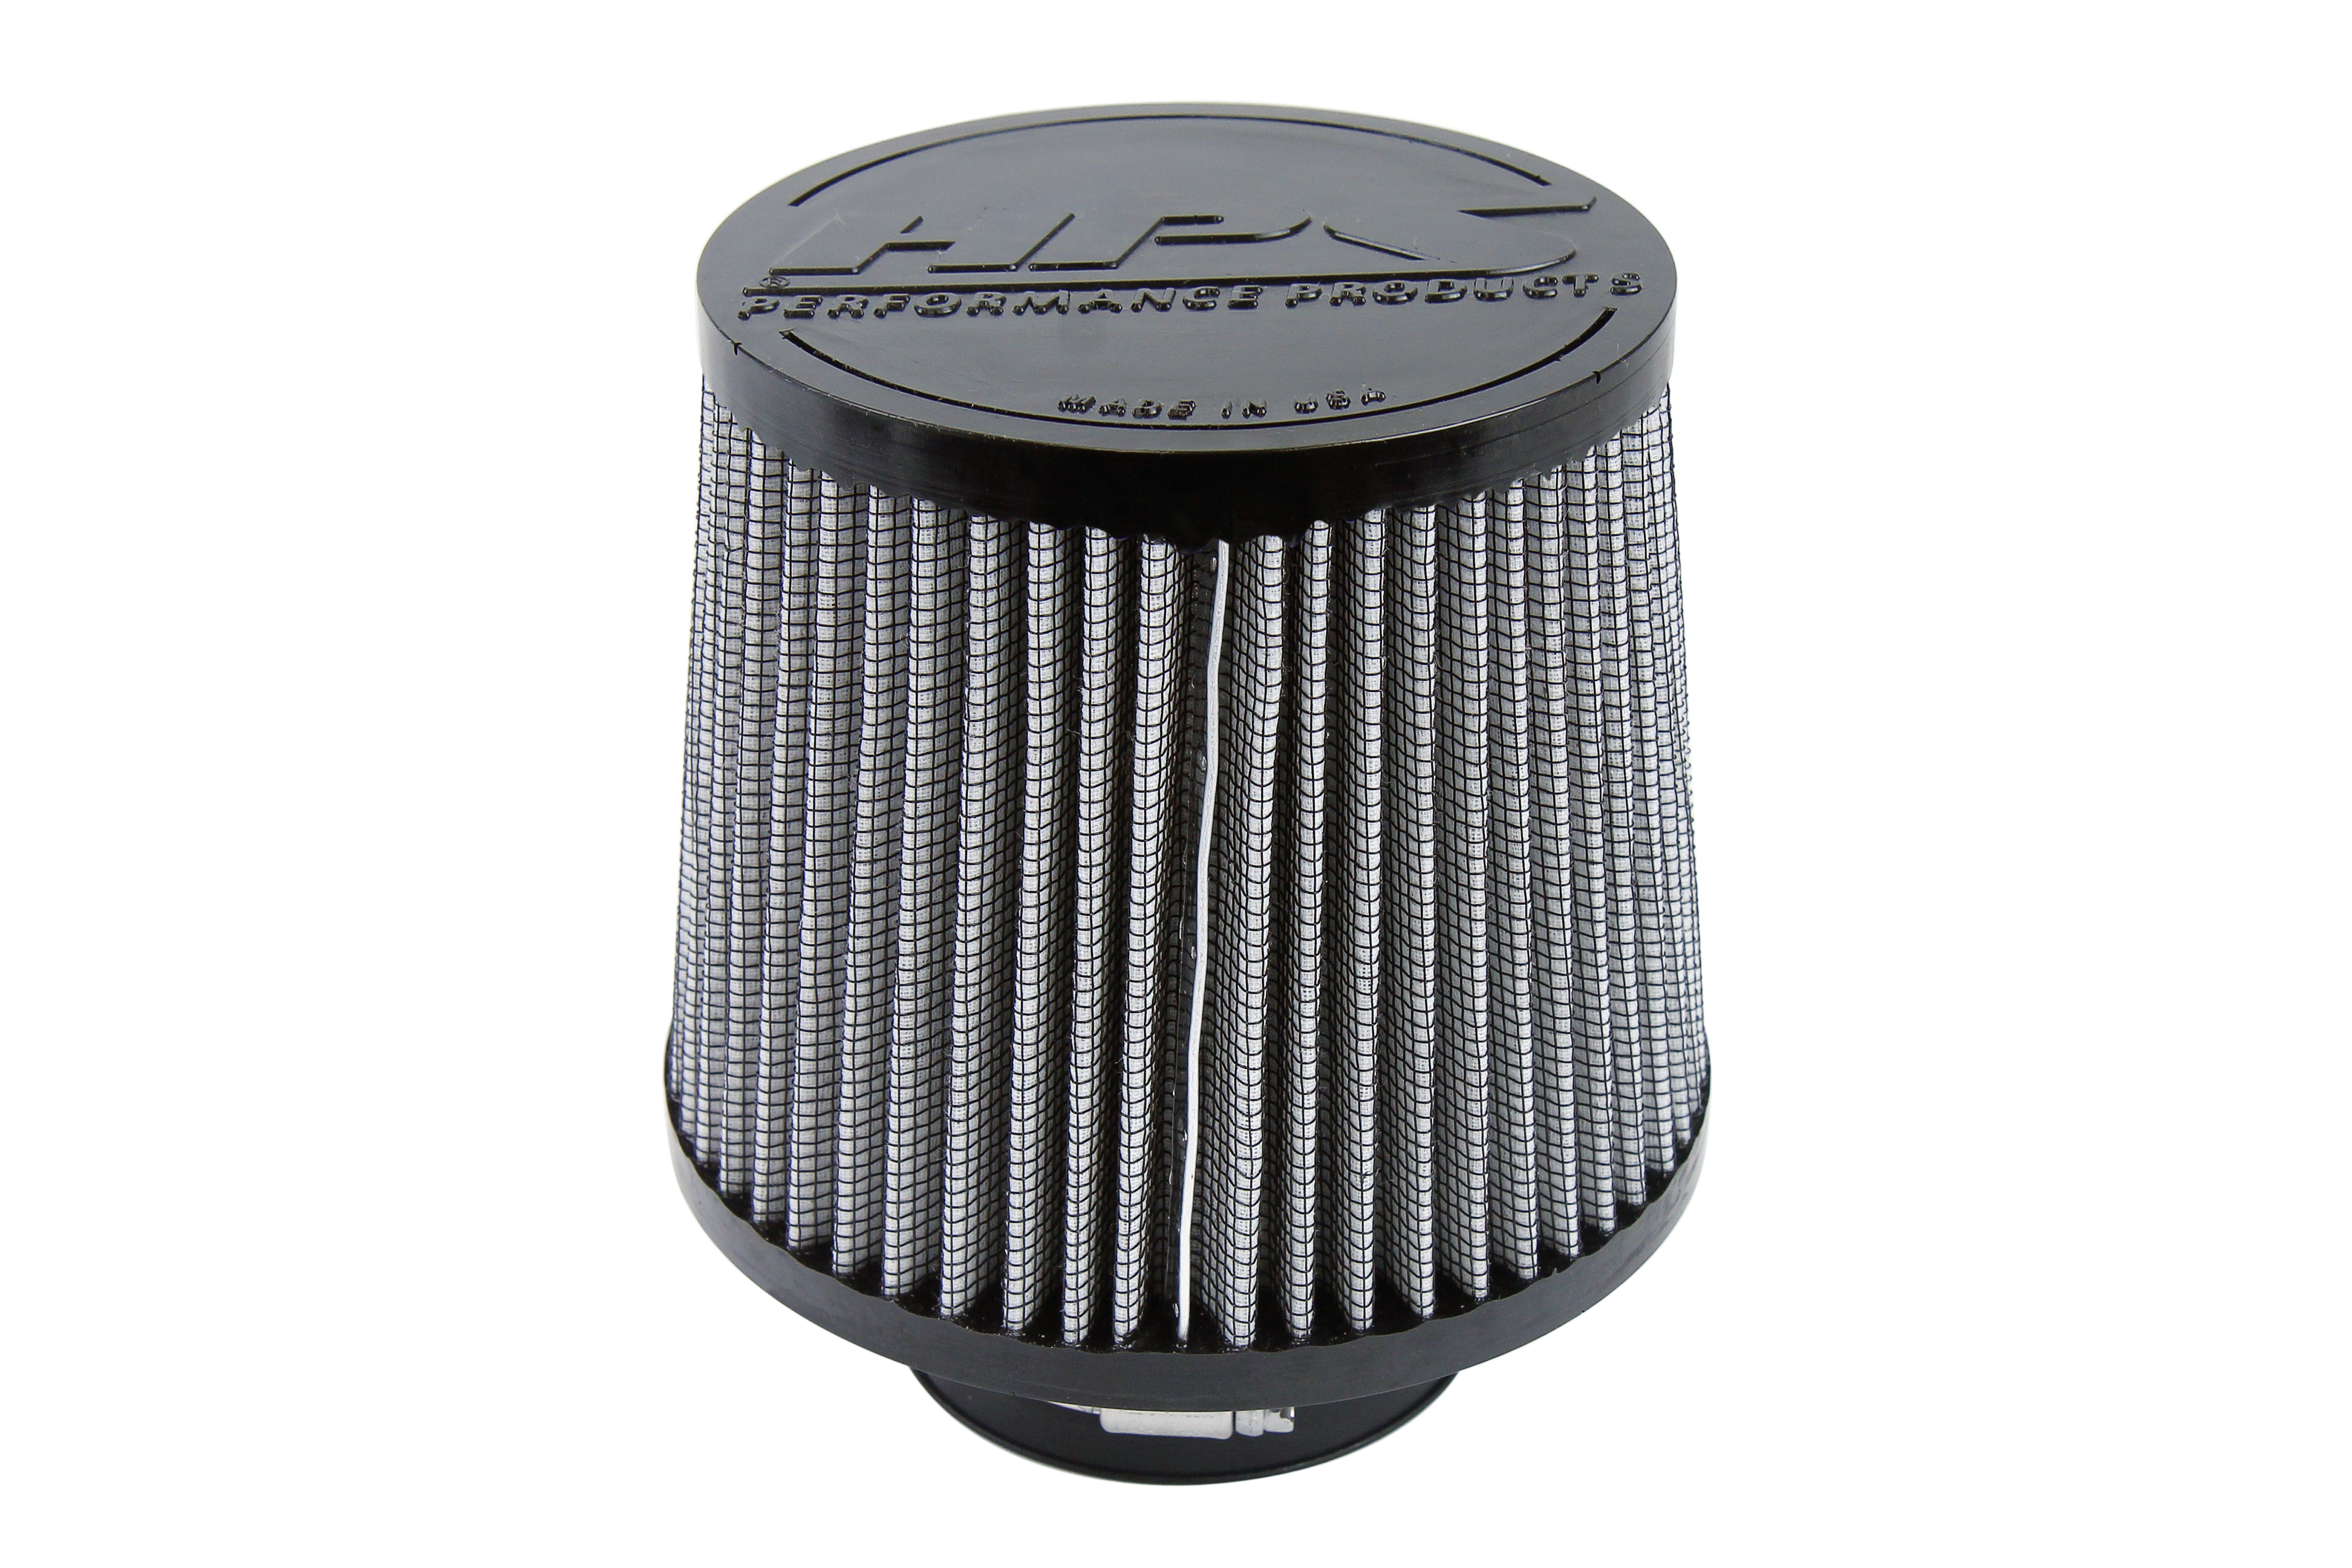 38Mm Air Filter Round Cone Universal Auto Cold Air Intake